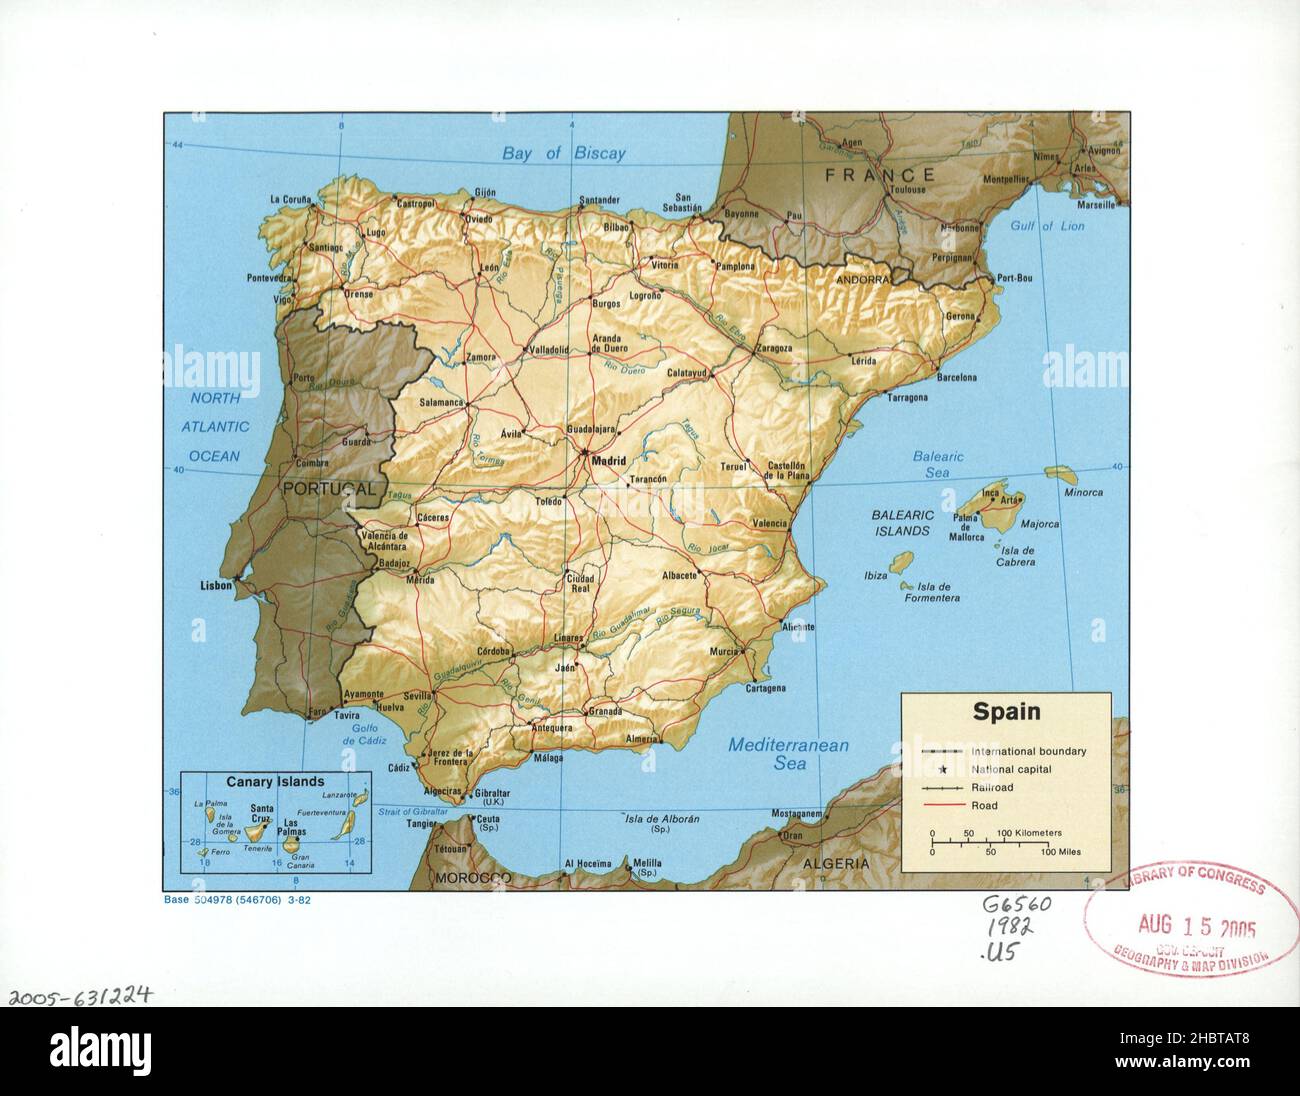 1982 Spain and Canary Islands Map Stock Photo